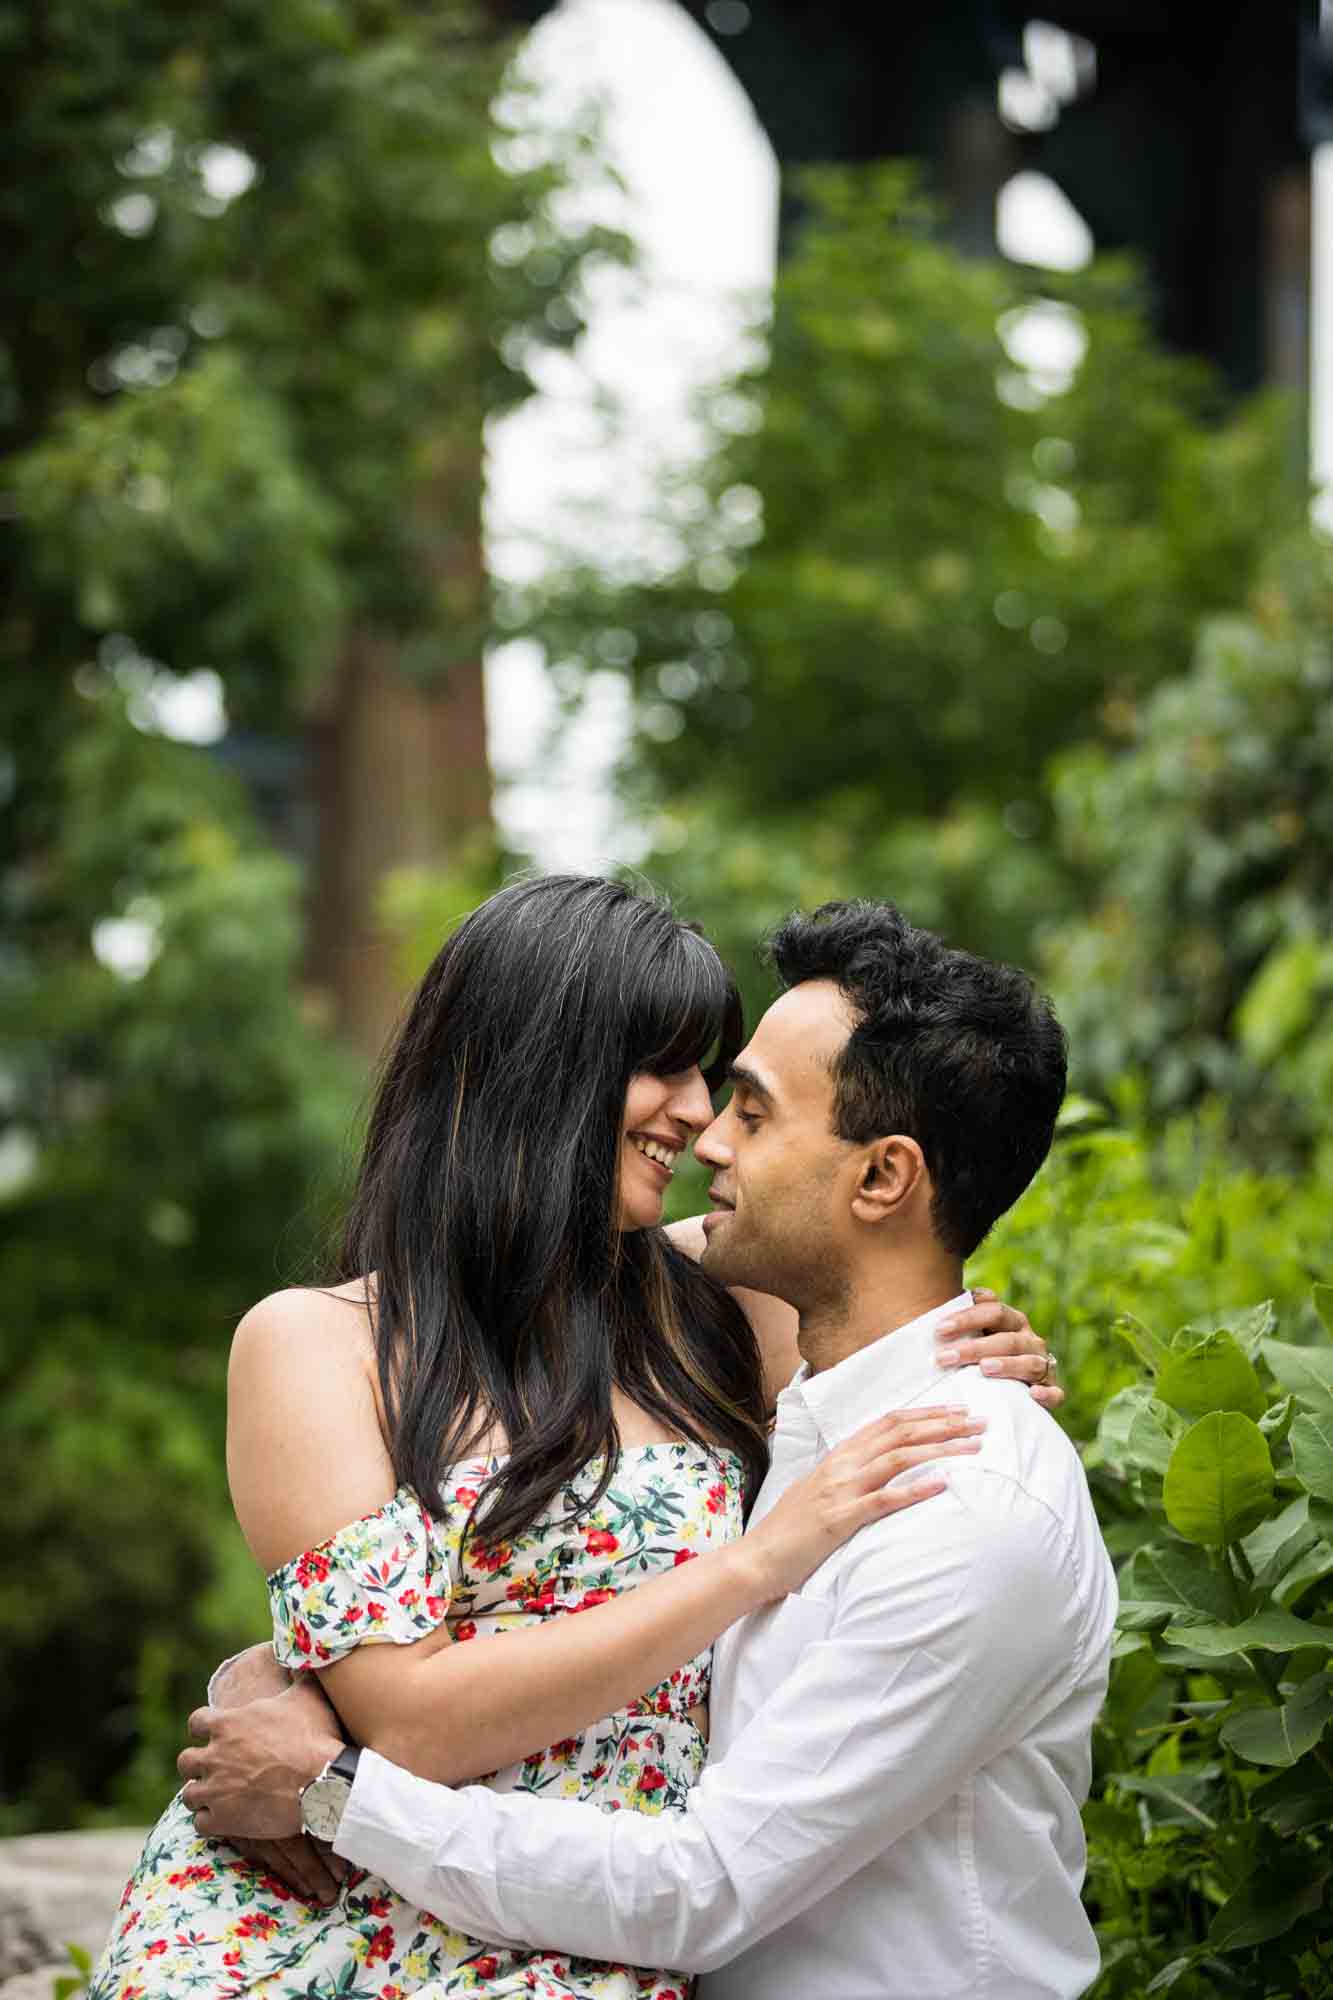 Woman sitting in man's lap in front of trees and bushes during a Brooklyn Bridge Park engagement photo shoot